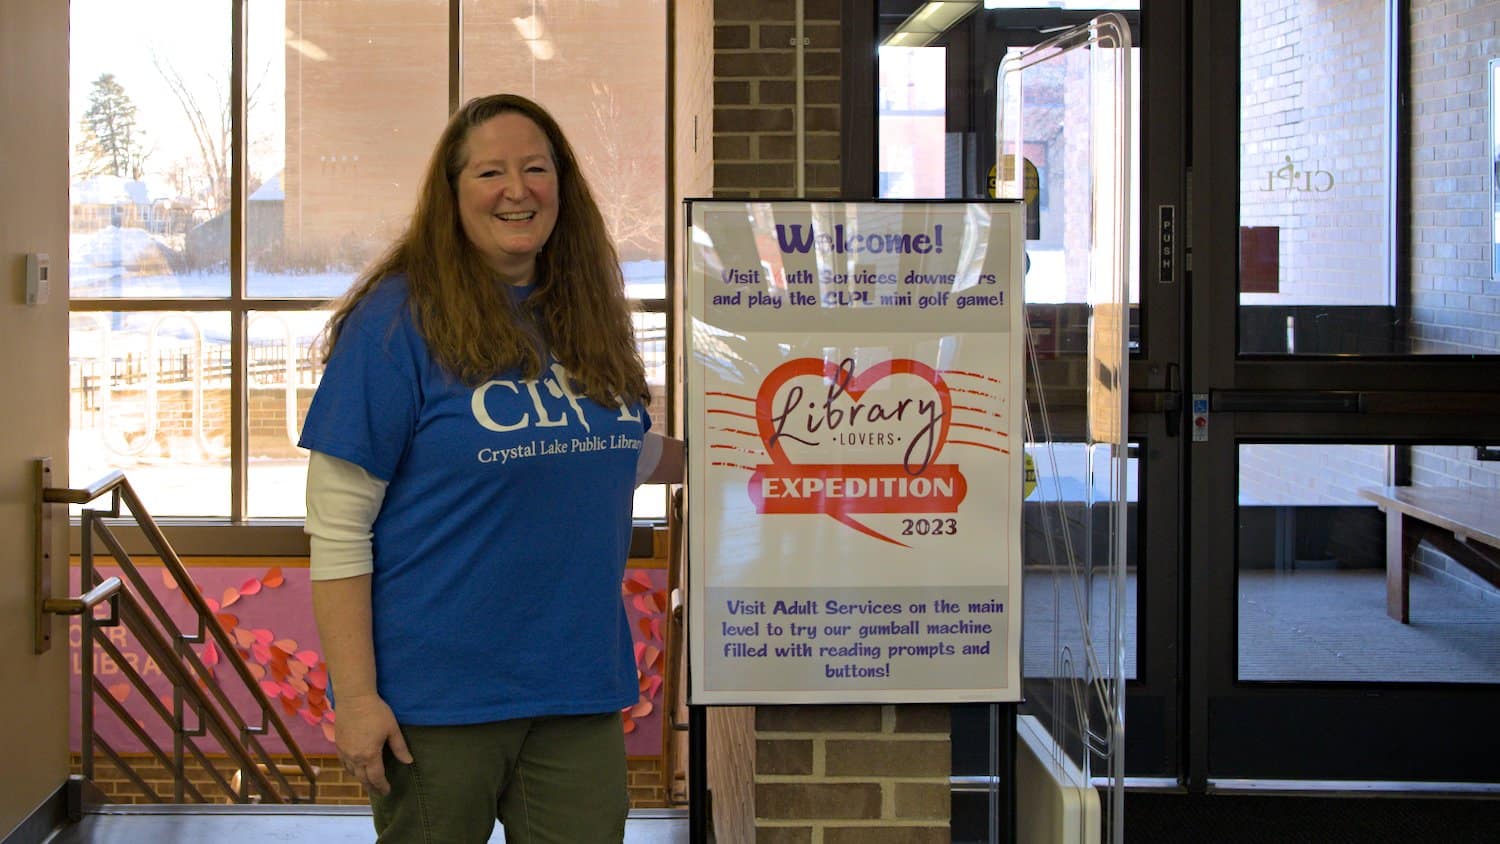 Seanine Brady standing next to the Library Lovers Expedition poster.